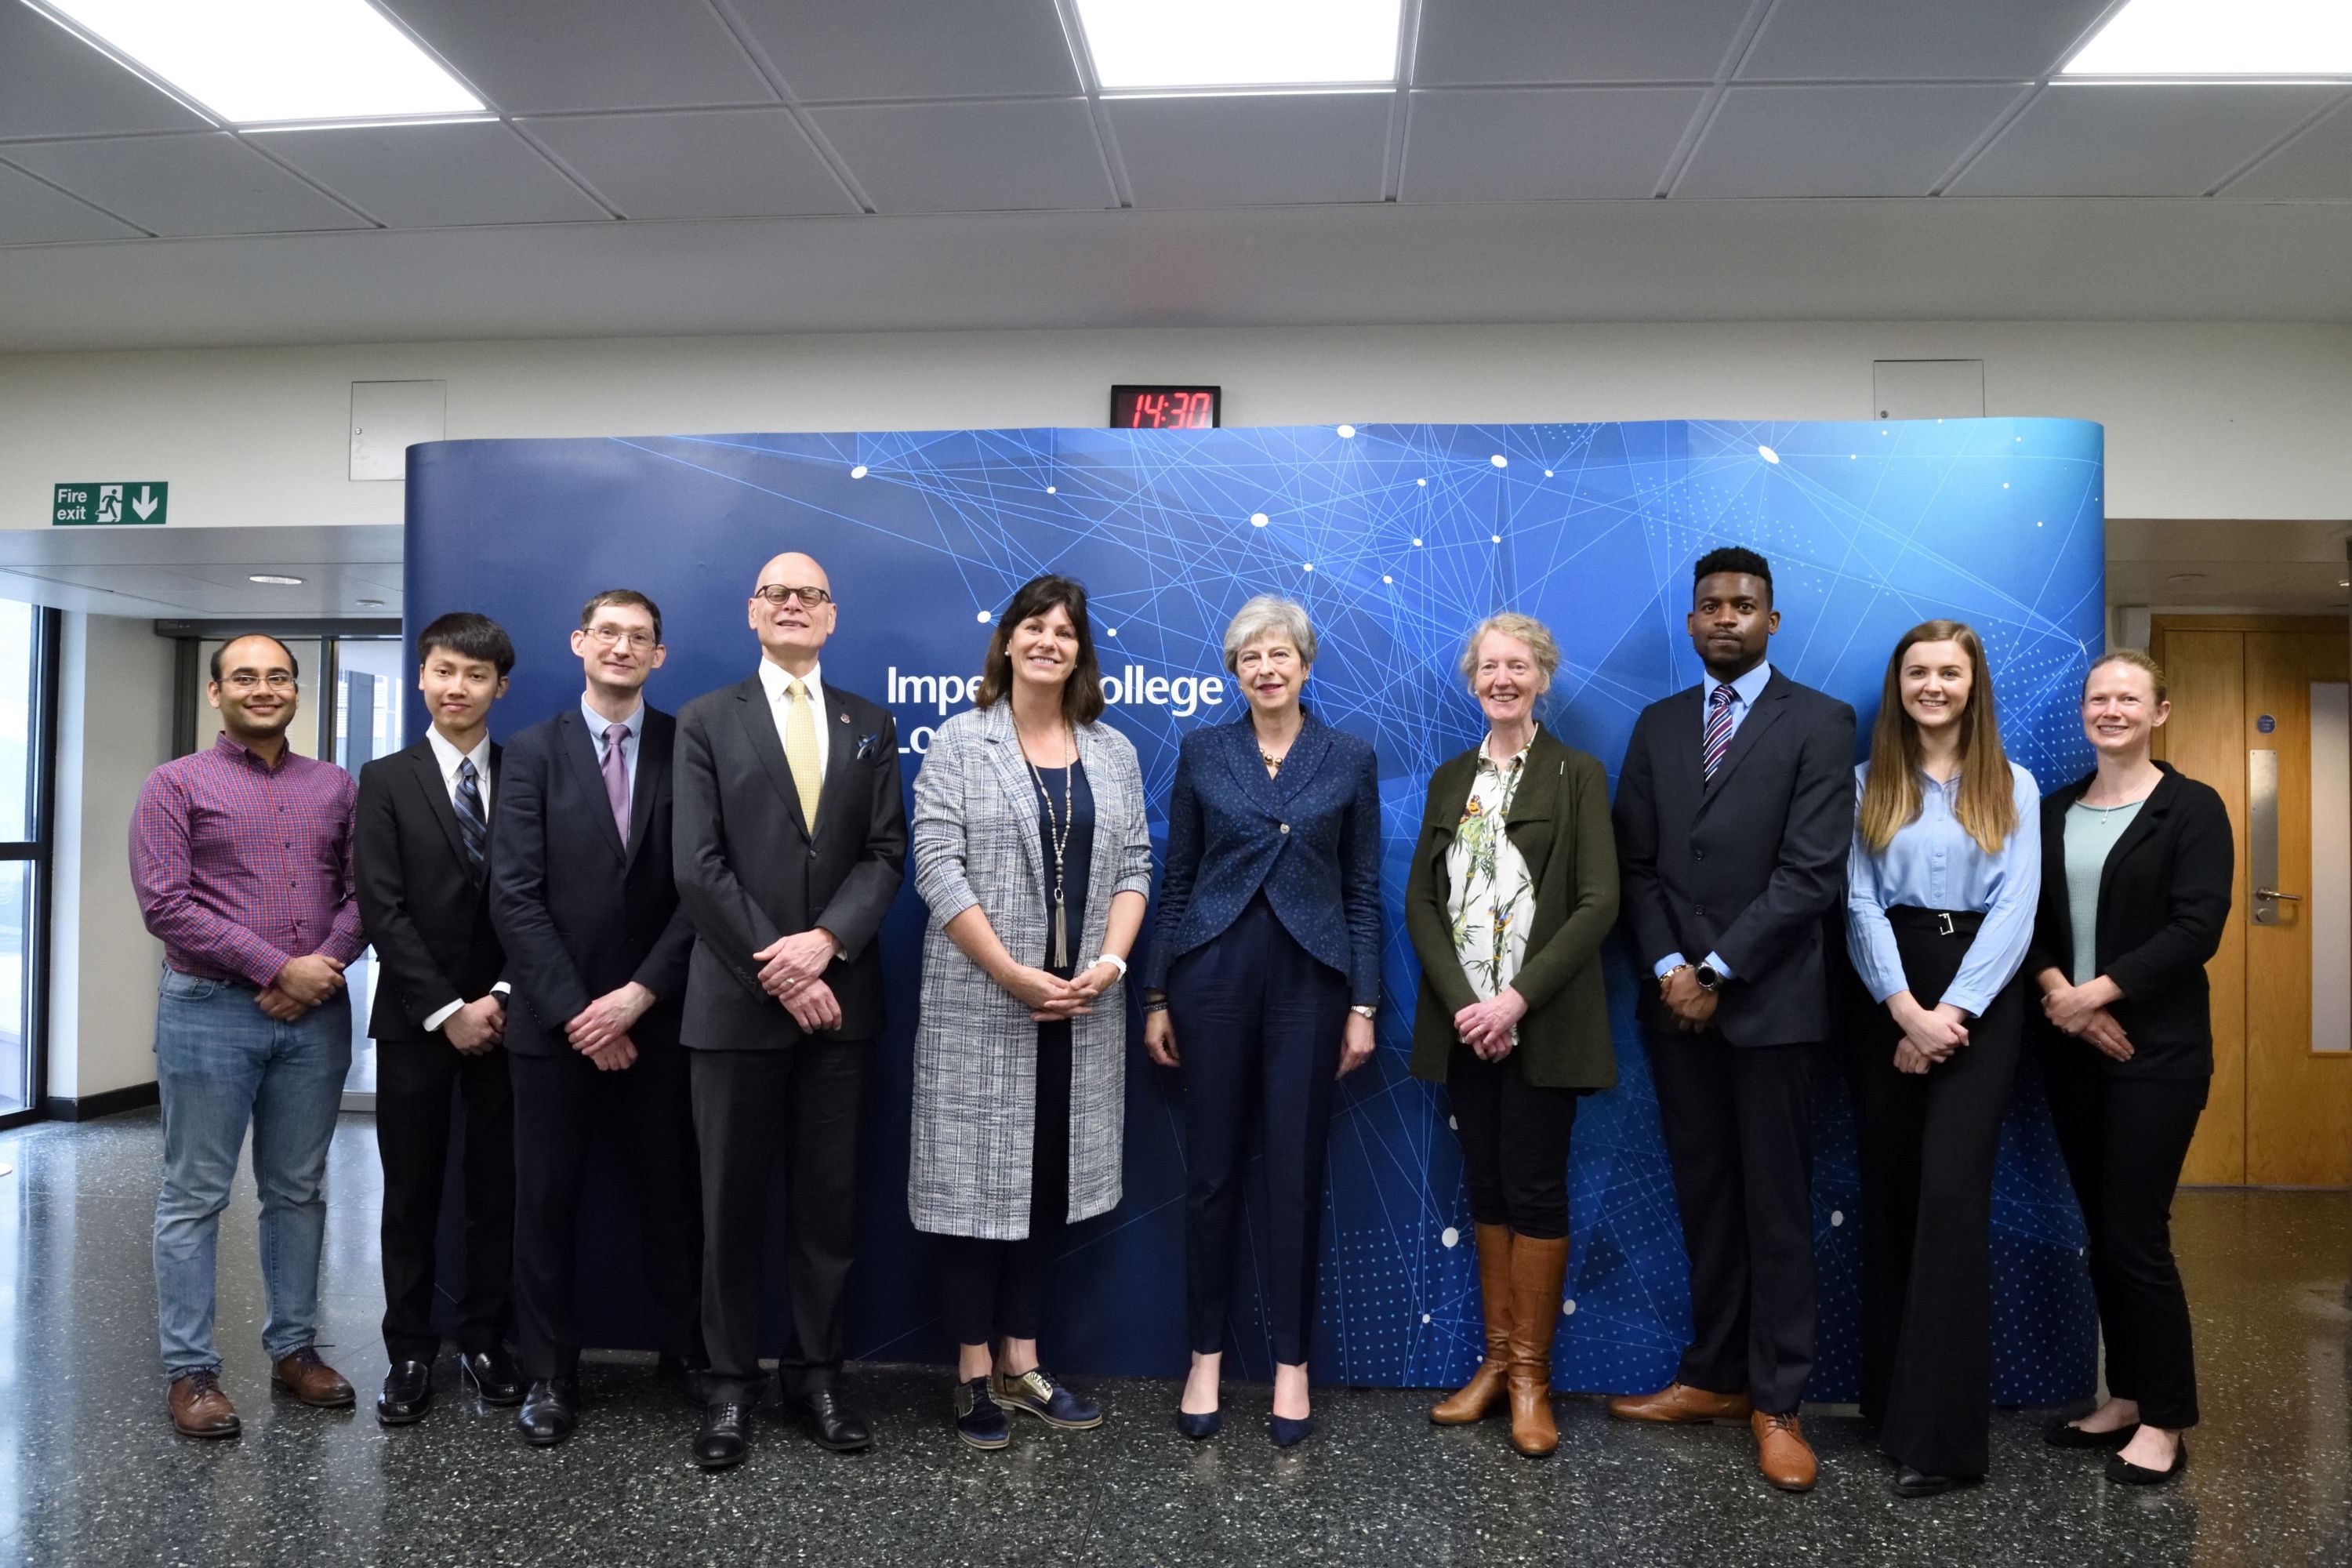 Provost - campus visit from Prime Minister Theresa May